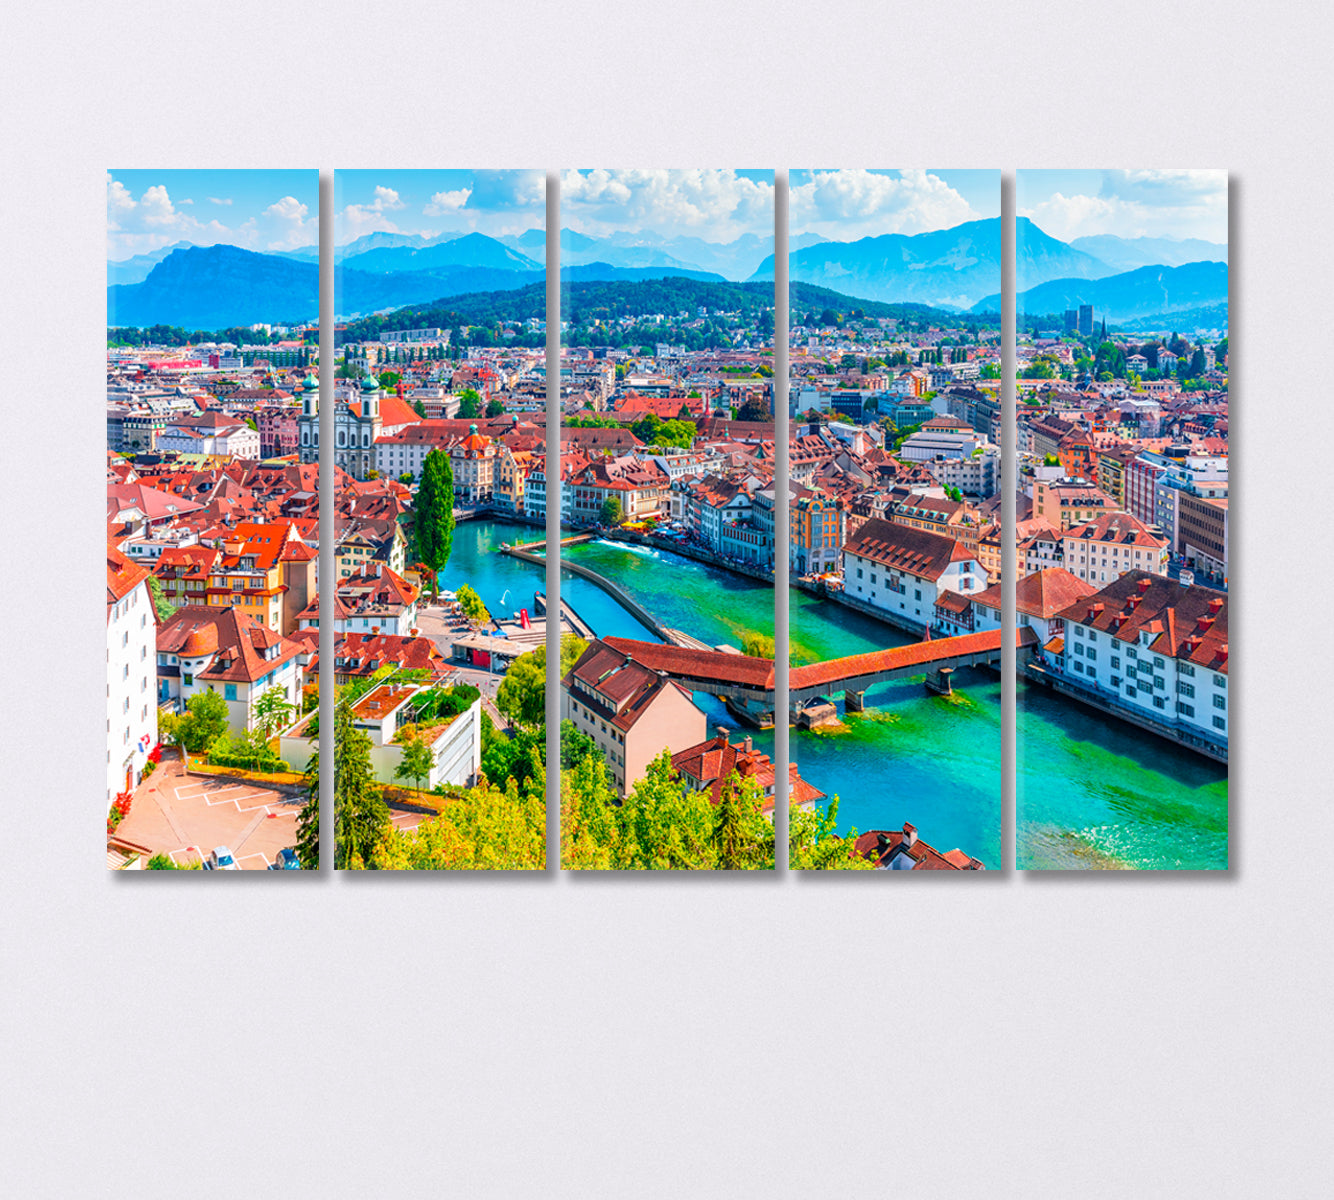 Scenic Panorama the Old Town of Lucerne Switzerland Canvas Print-Canvas Print-CetArt-5 Panels-36x24 inches-CetArt